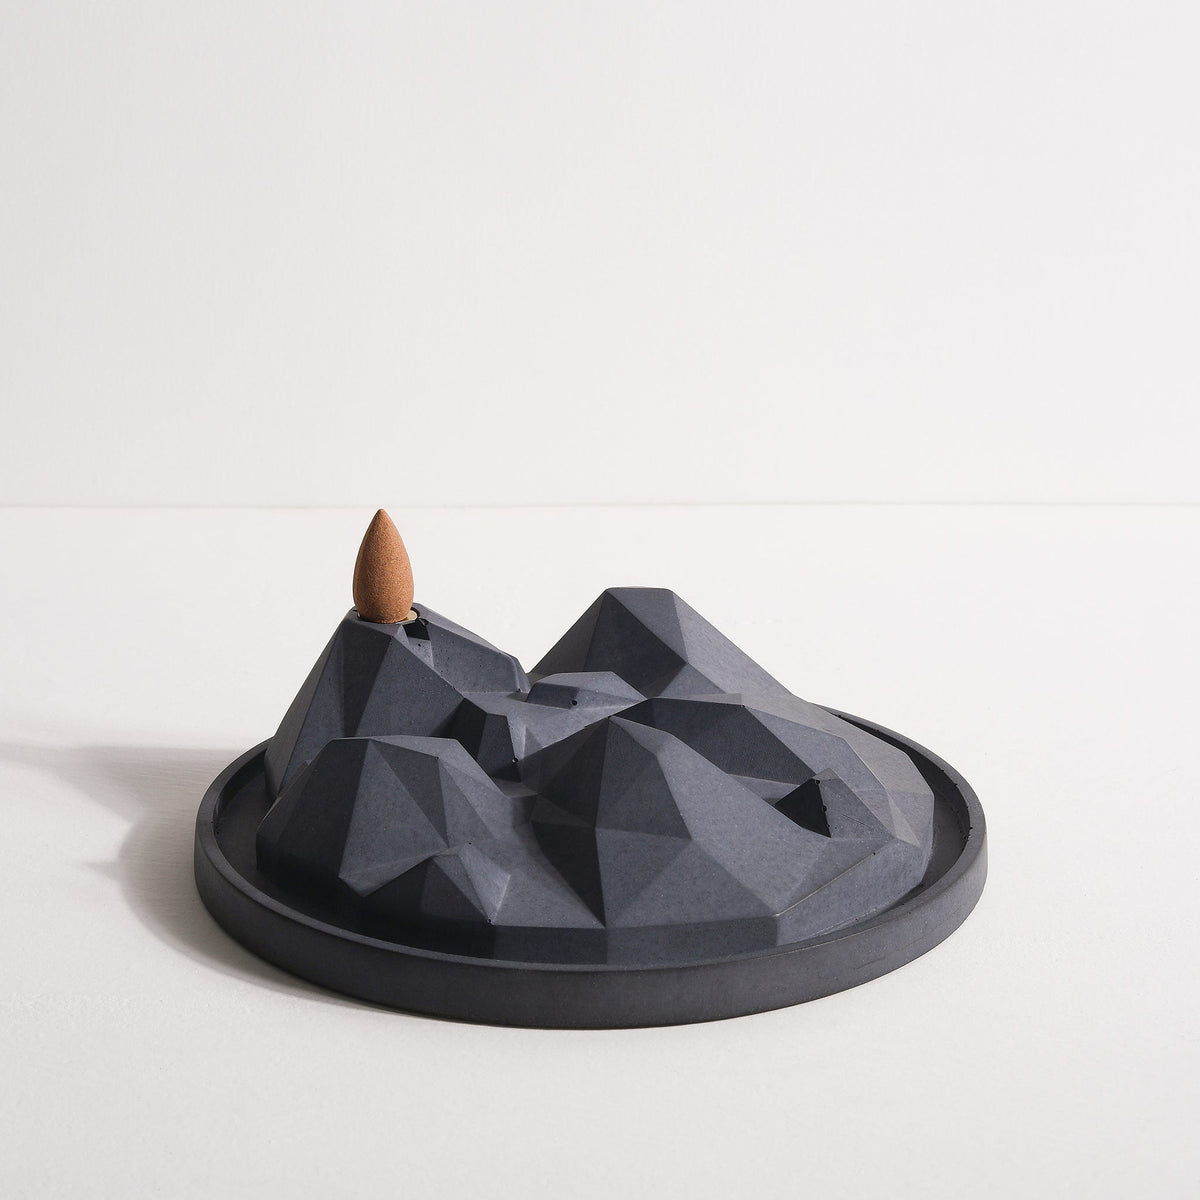 Side View of Valley of Fog Incense Fountain in gift set by Kin Objects